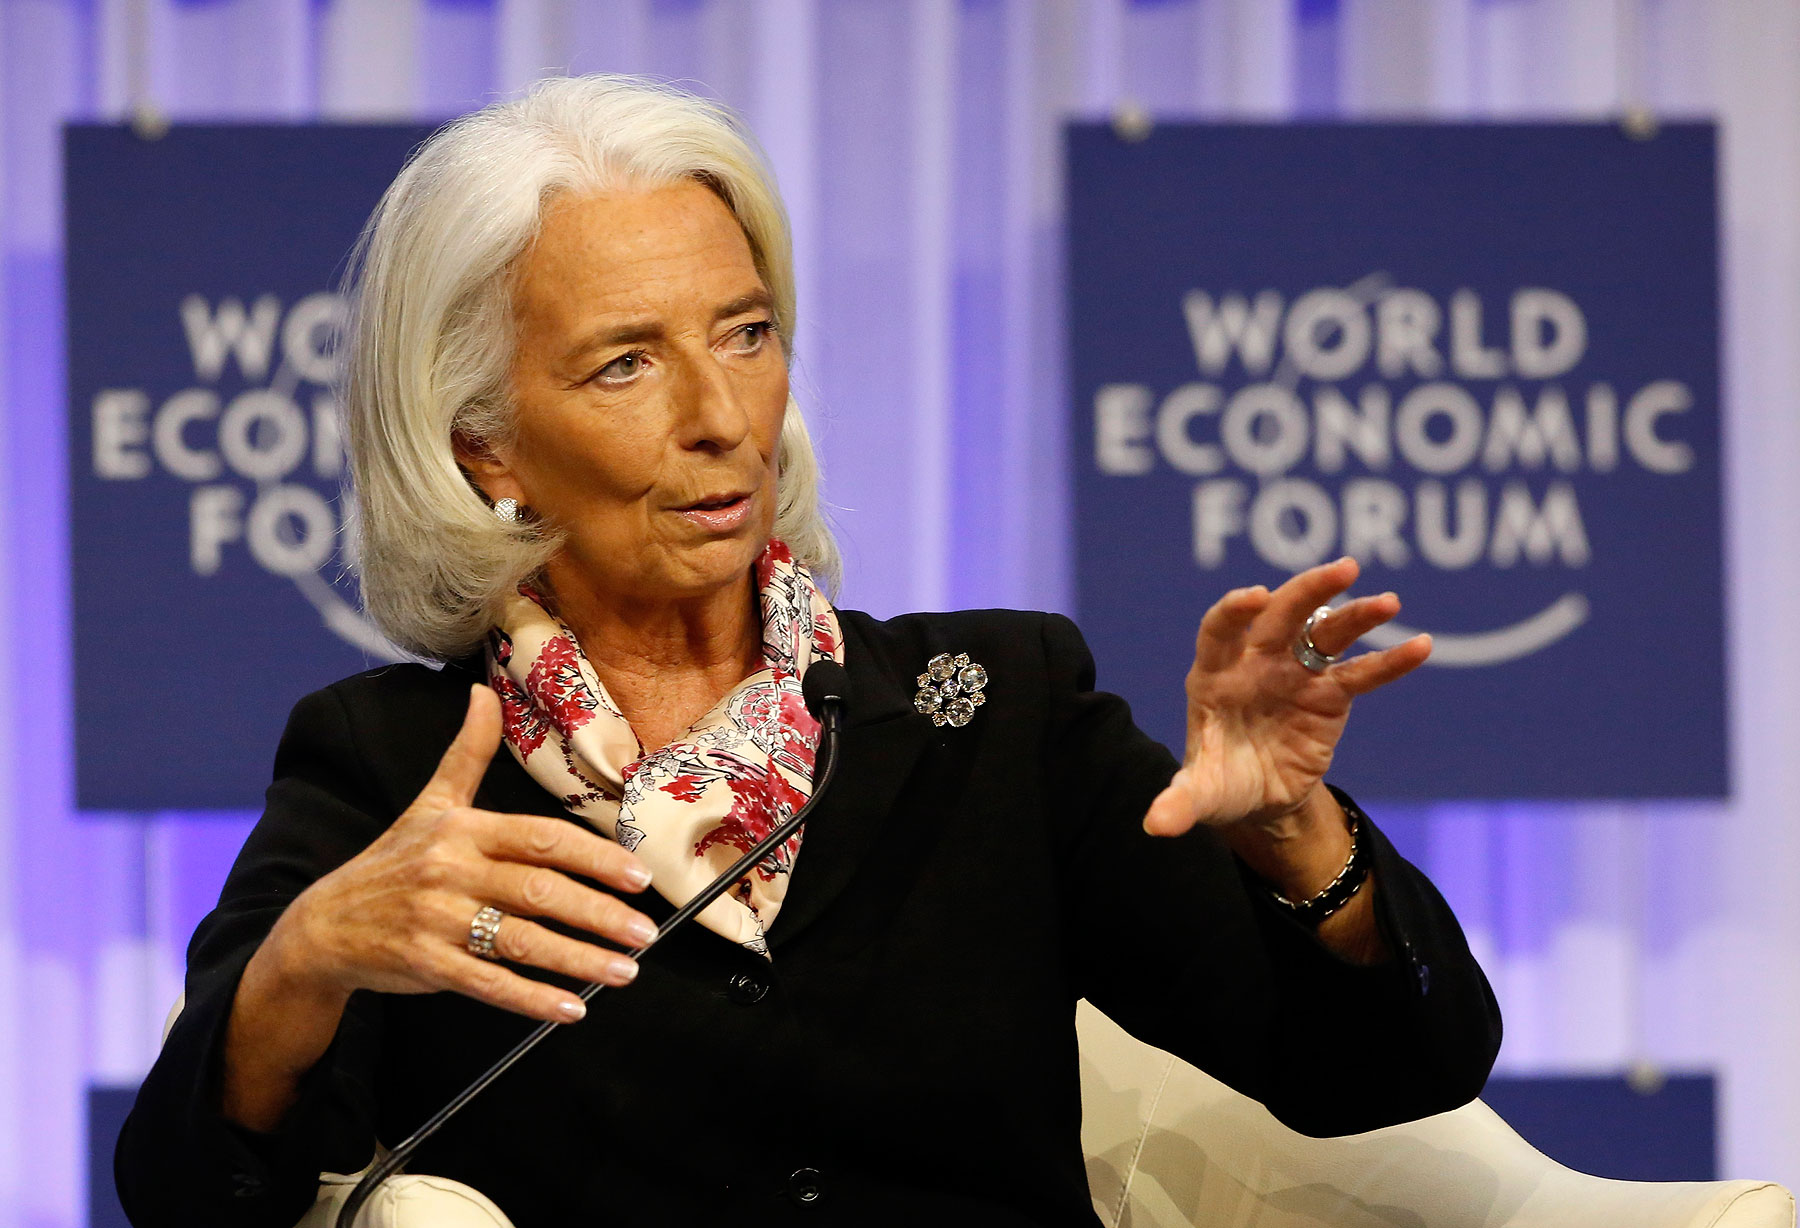 Christine Lagarde, Managing Director of the International Monetary Fund (IMF) speaks during a session at the World Economic Forum (WEF) in Davos Jan. 25, 2014 (Ruben Sprich—Reuters)